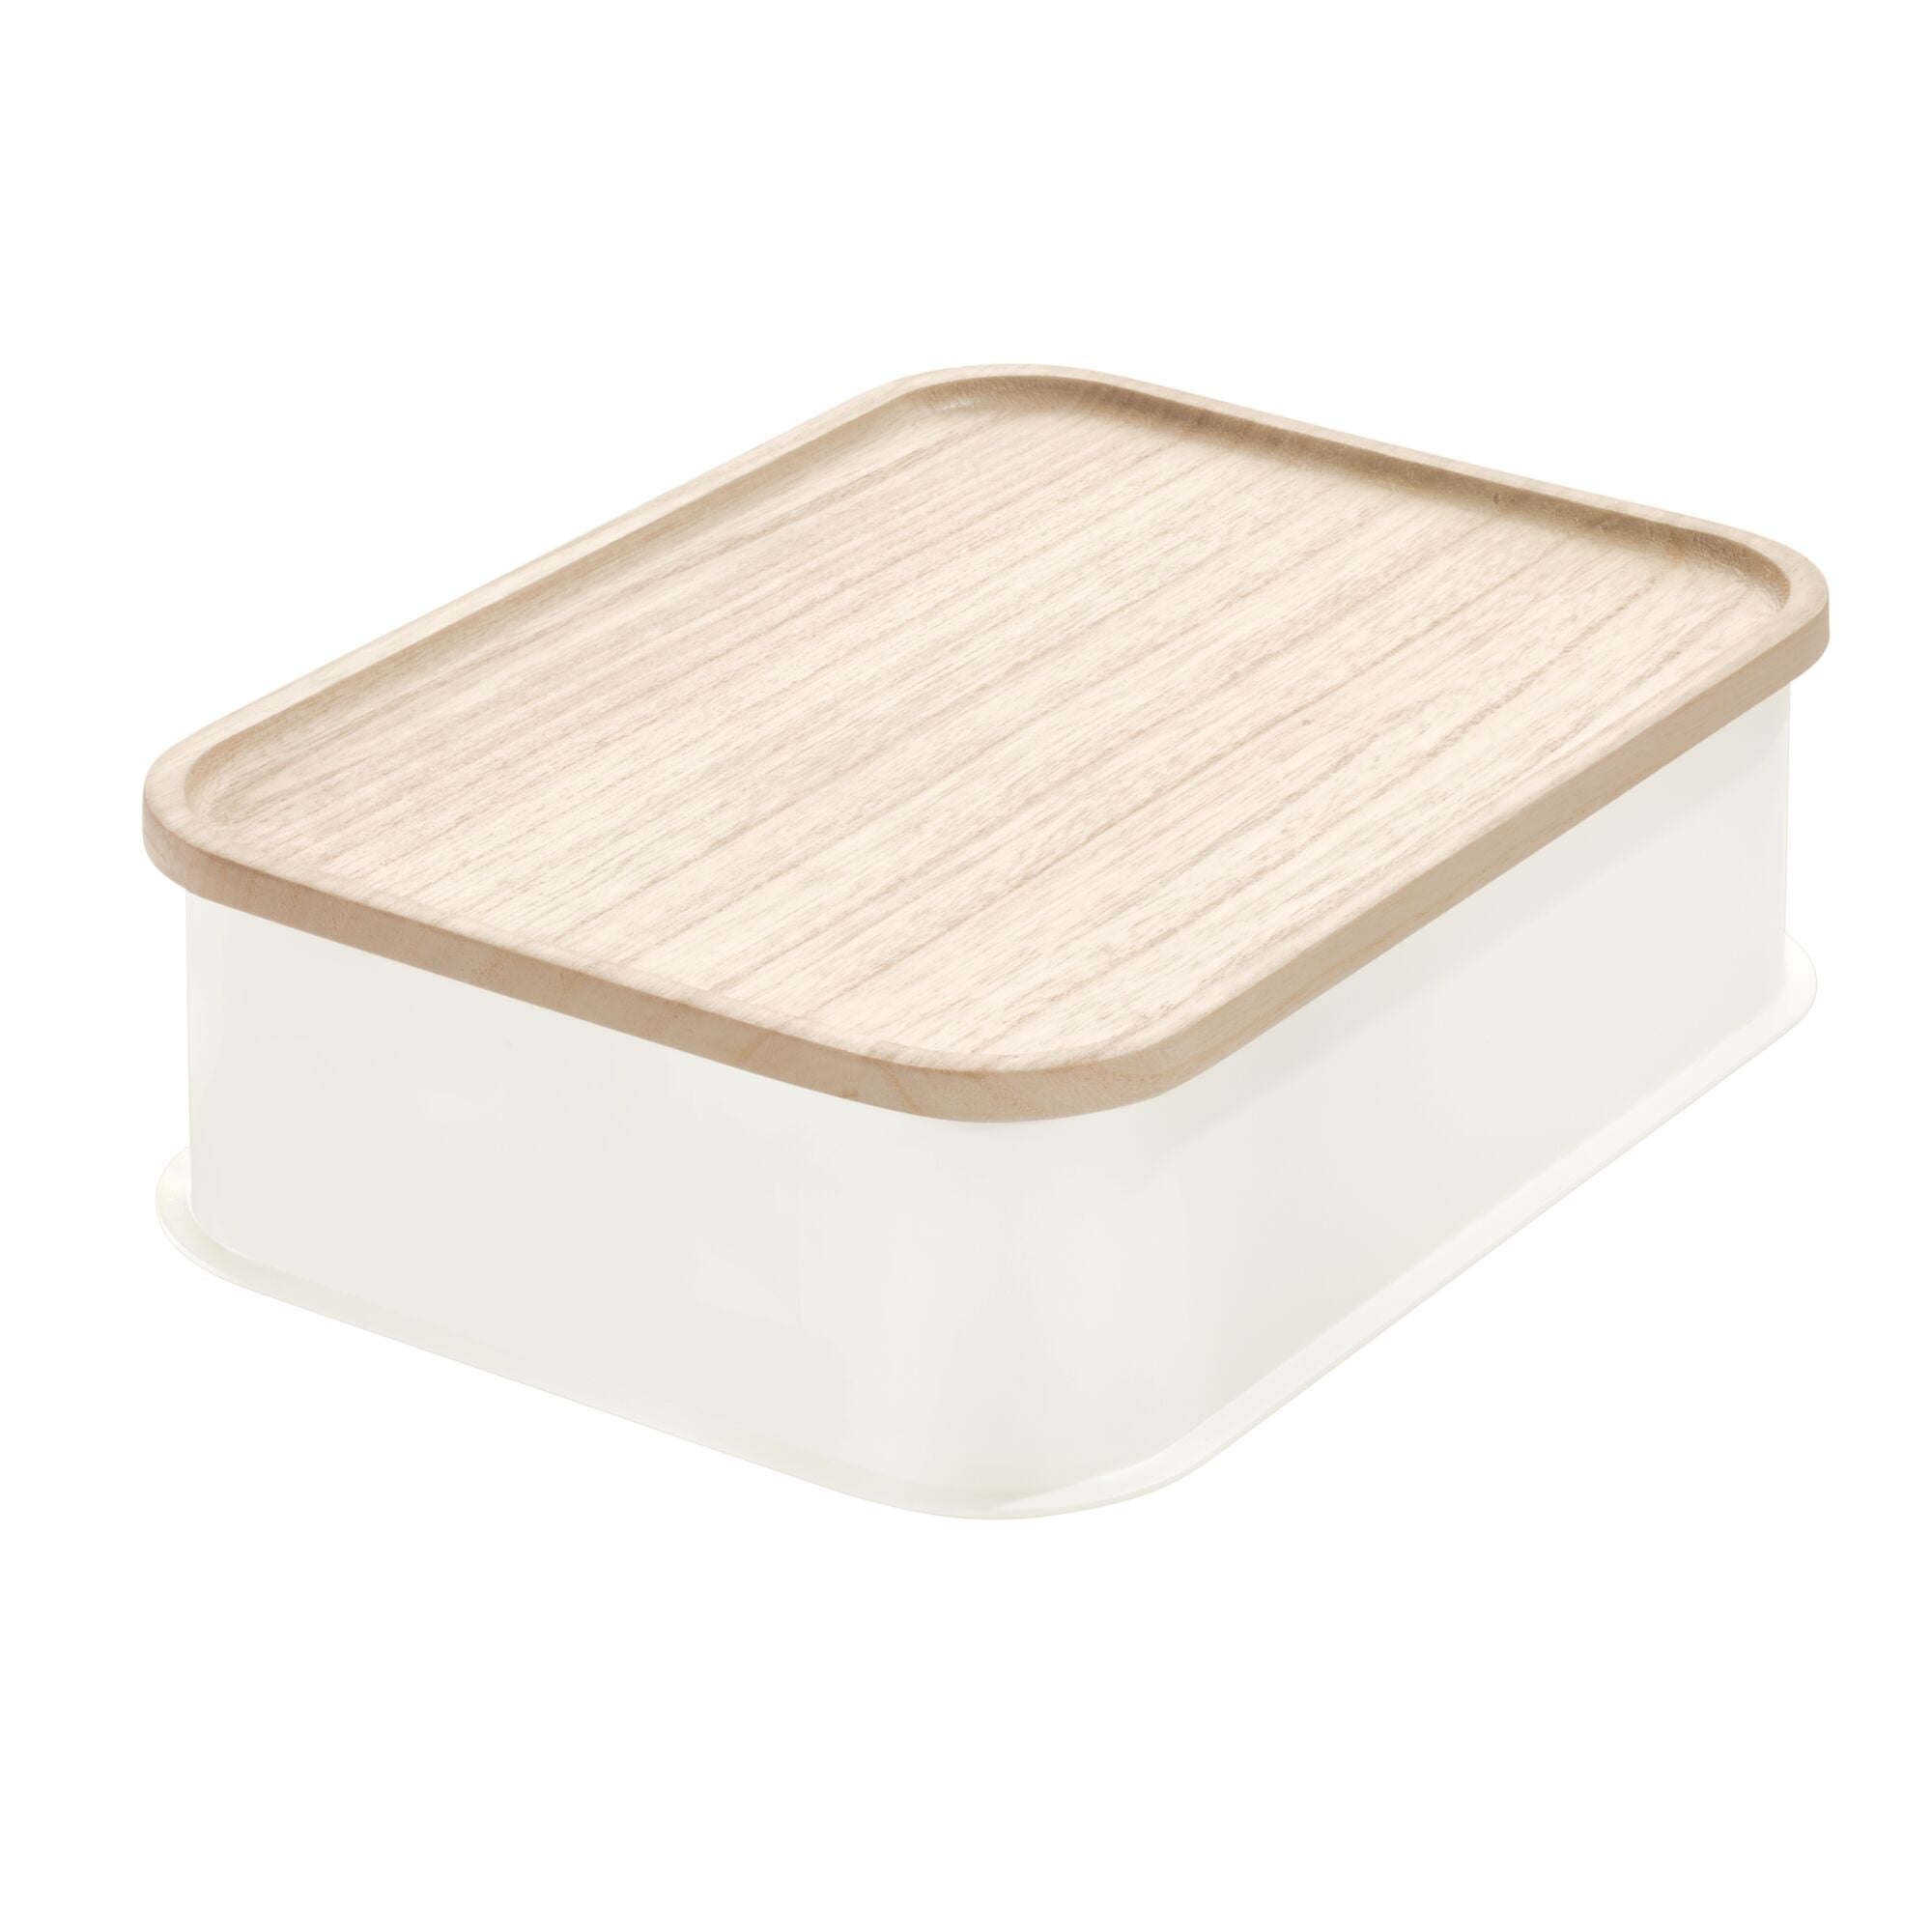 iDesign Large Handled Bin with Bamboo Lid Coconut